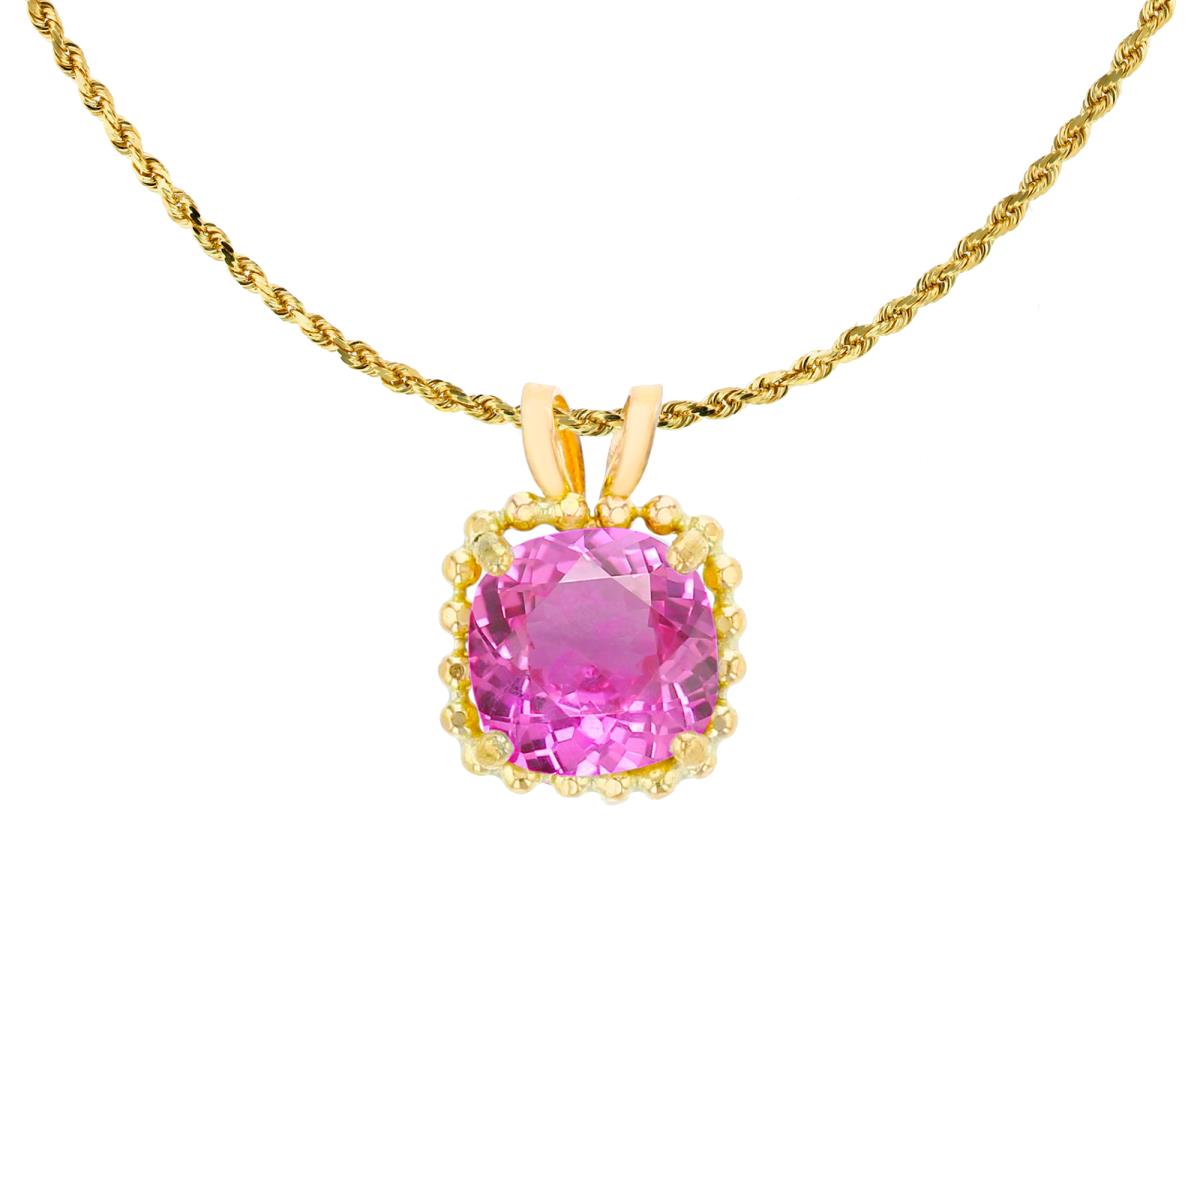 10K Yellow Gold 6mm Cushion Cut Created Pink Sapphire Bead Frame Rabbit Ear 18" Rope Chain Necklace